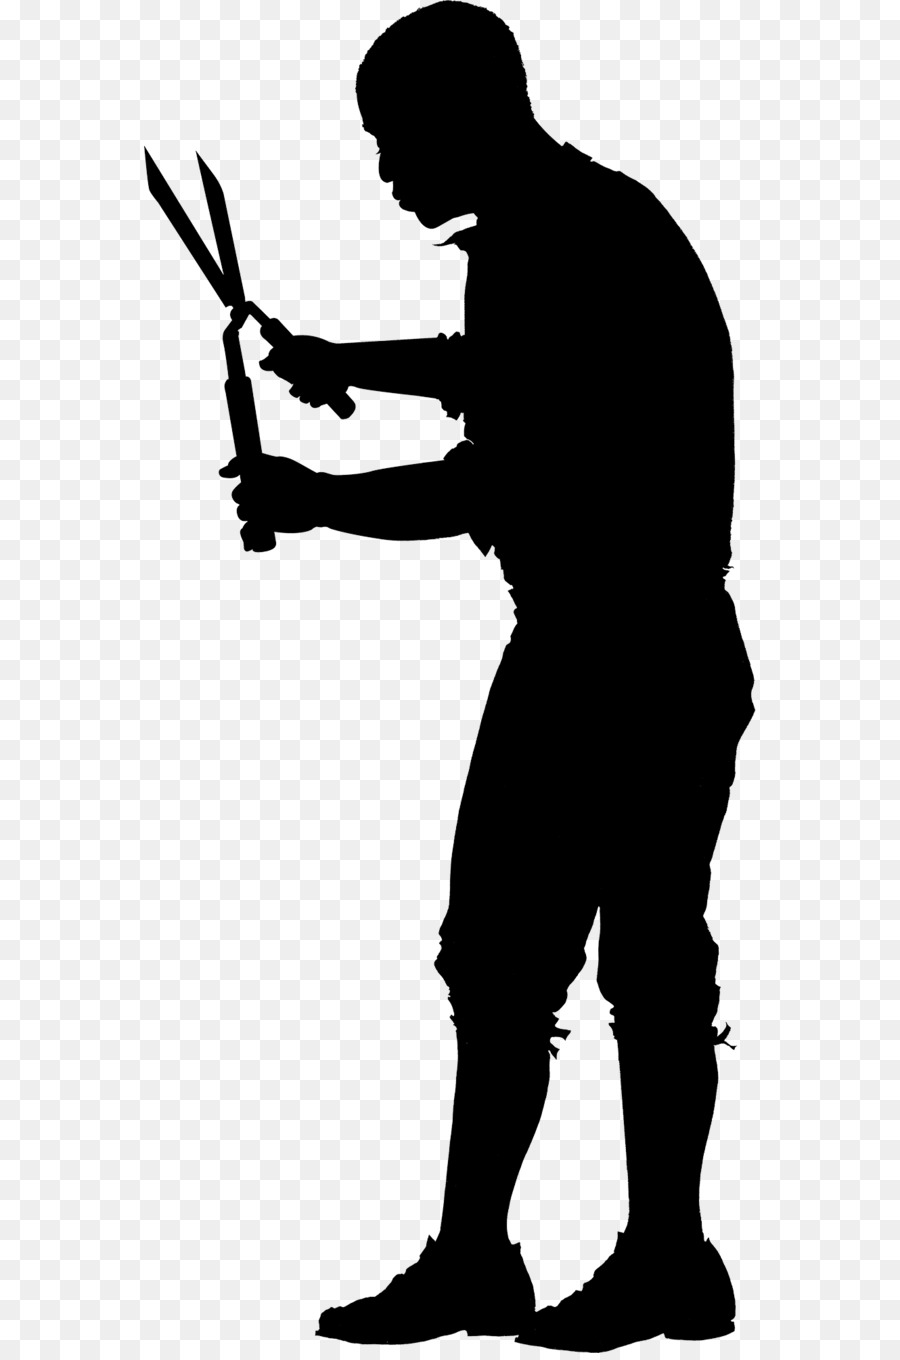 Mount Vernon Silhouette Farmer Clip art - Silhouette png download - 1330*2000 - Free Transparent Mount Vernon png Download.